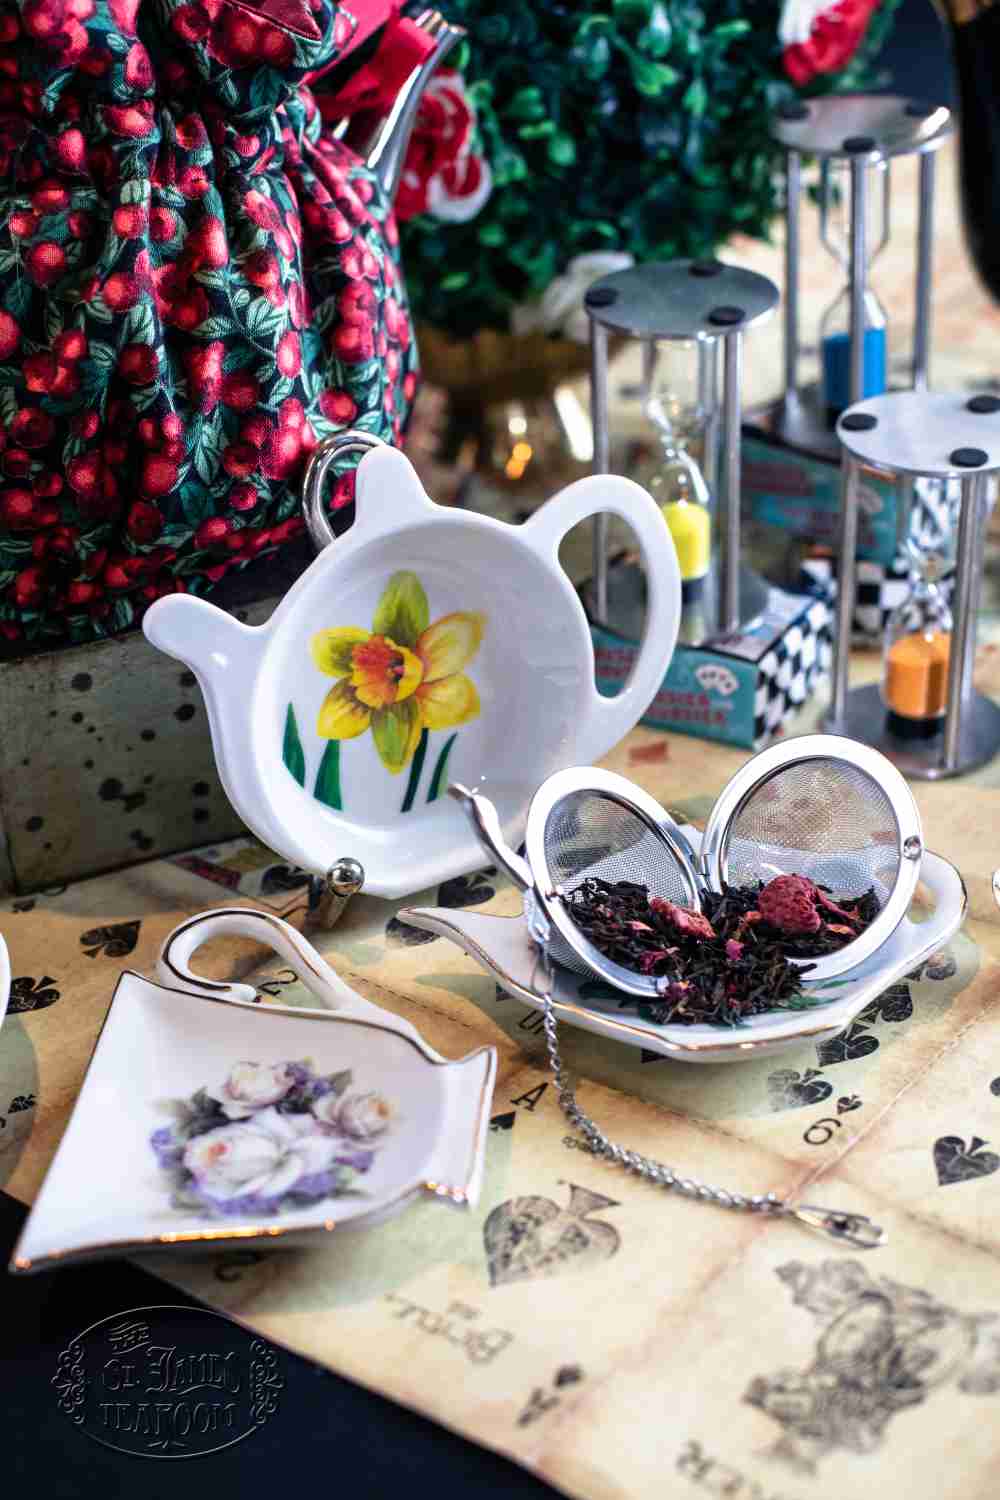 Online Tea Shop and Gift Shop - Tea Accoutrements and Accessories